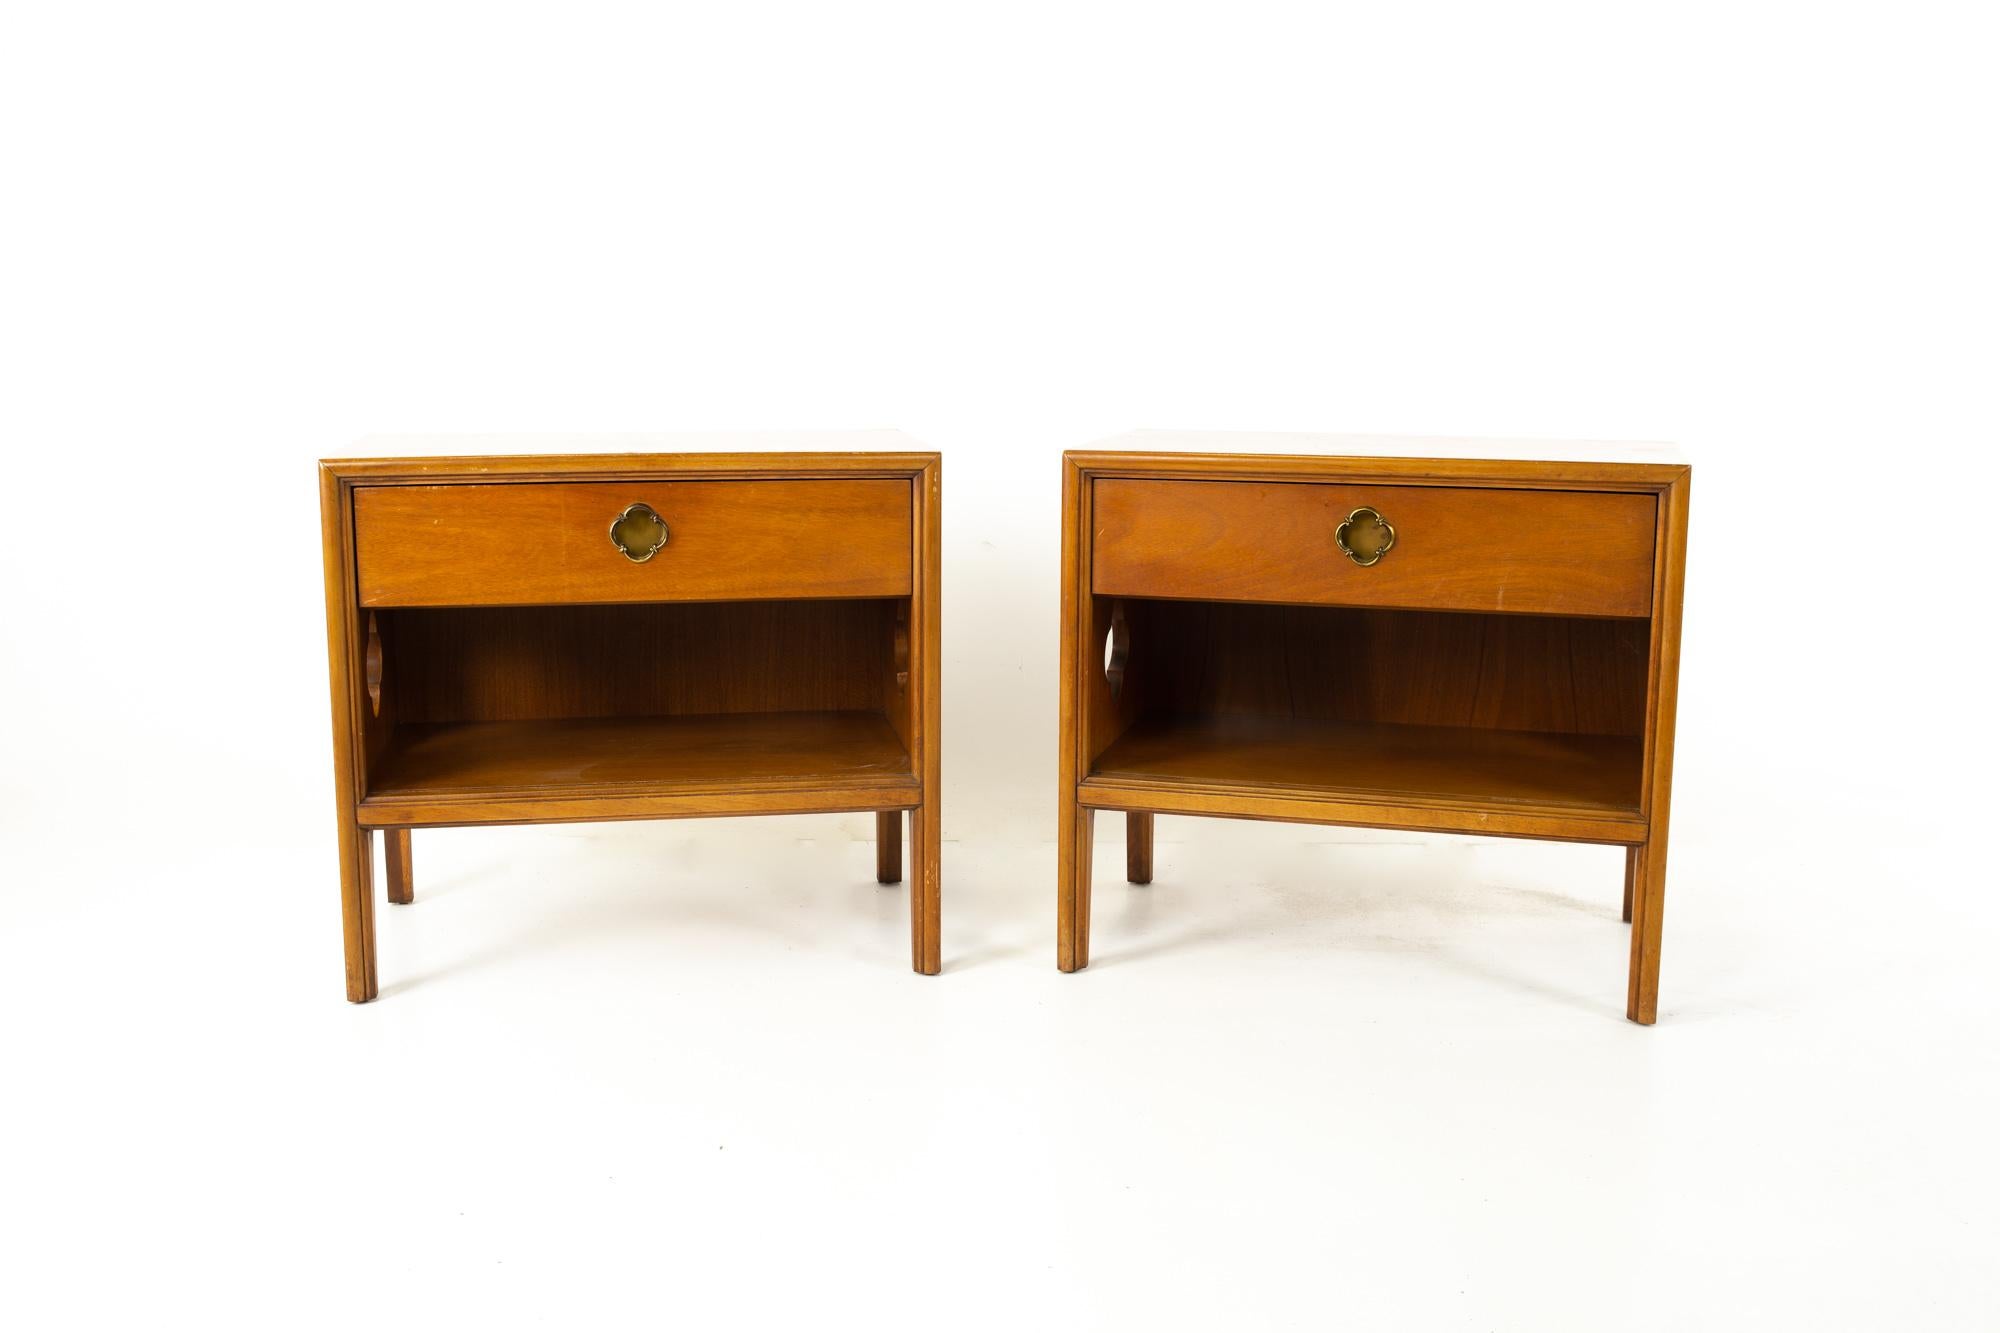 Kent Coffey panorama Mid Century walnut and brass nightstands, pair
Each nightstand measures: 26 wide x 16 deep x 24 inches high

All pieces of furniture can be had in what we call restored vintage condition. That means the piece is restored upon